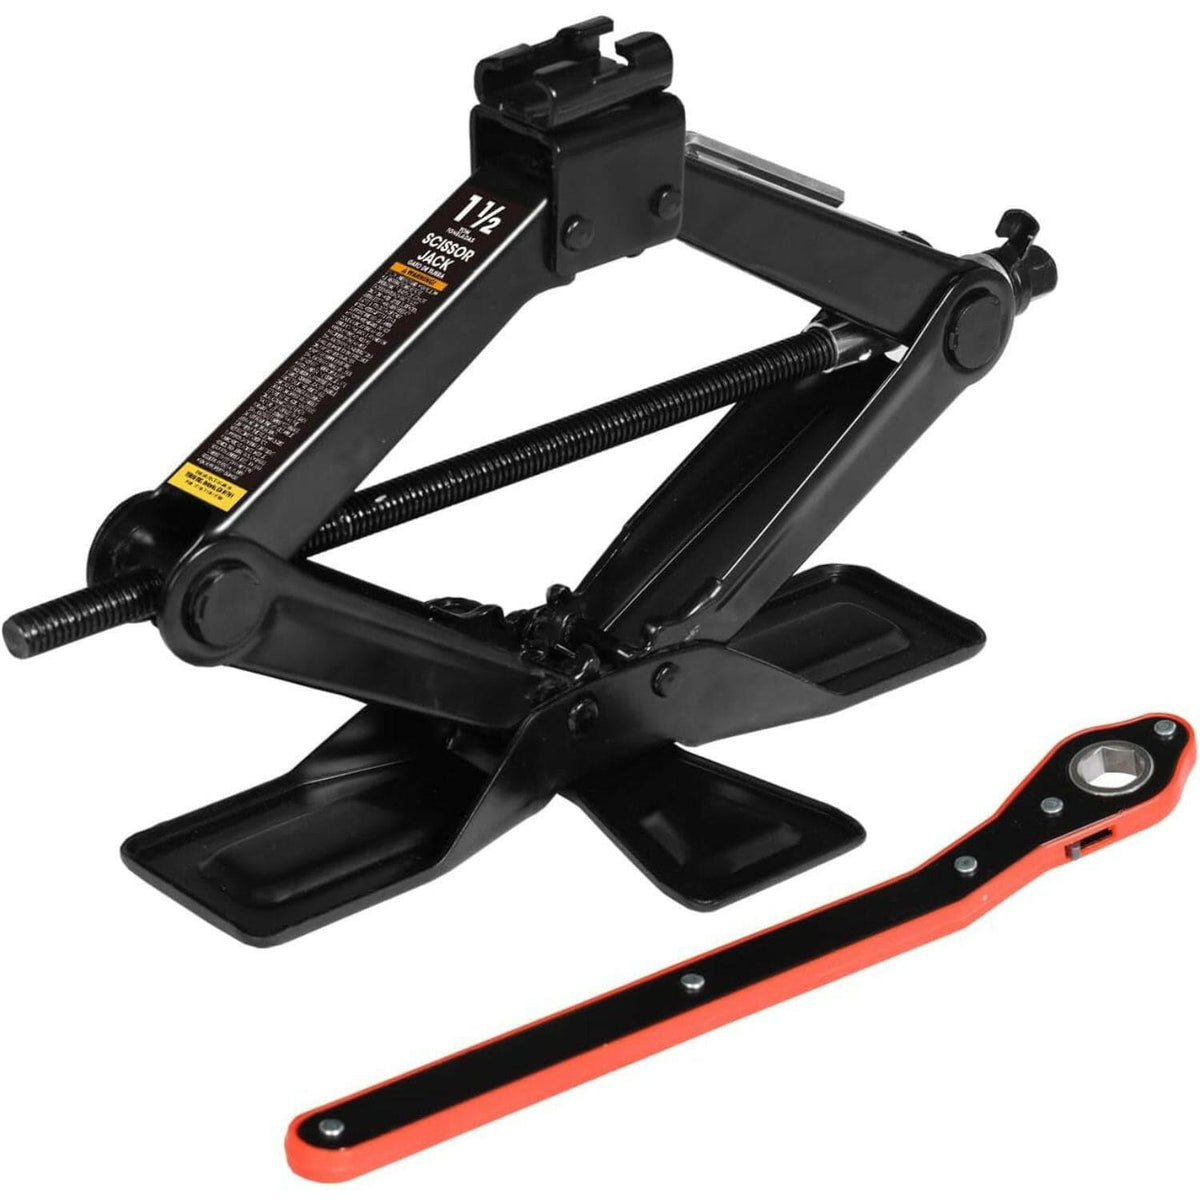 big-red-1.5-ton-scissor-jack-with-cross-base-and-ratchet-wrench